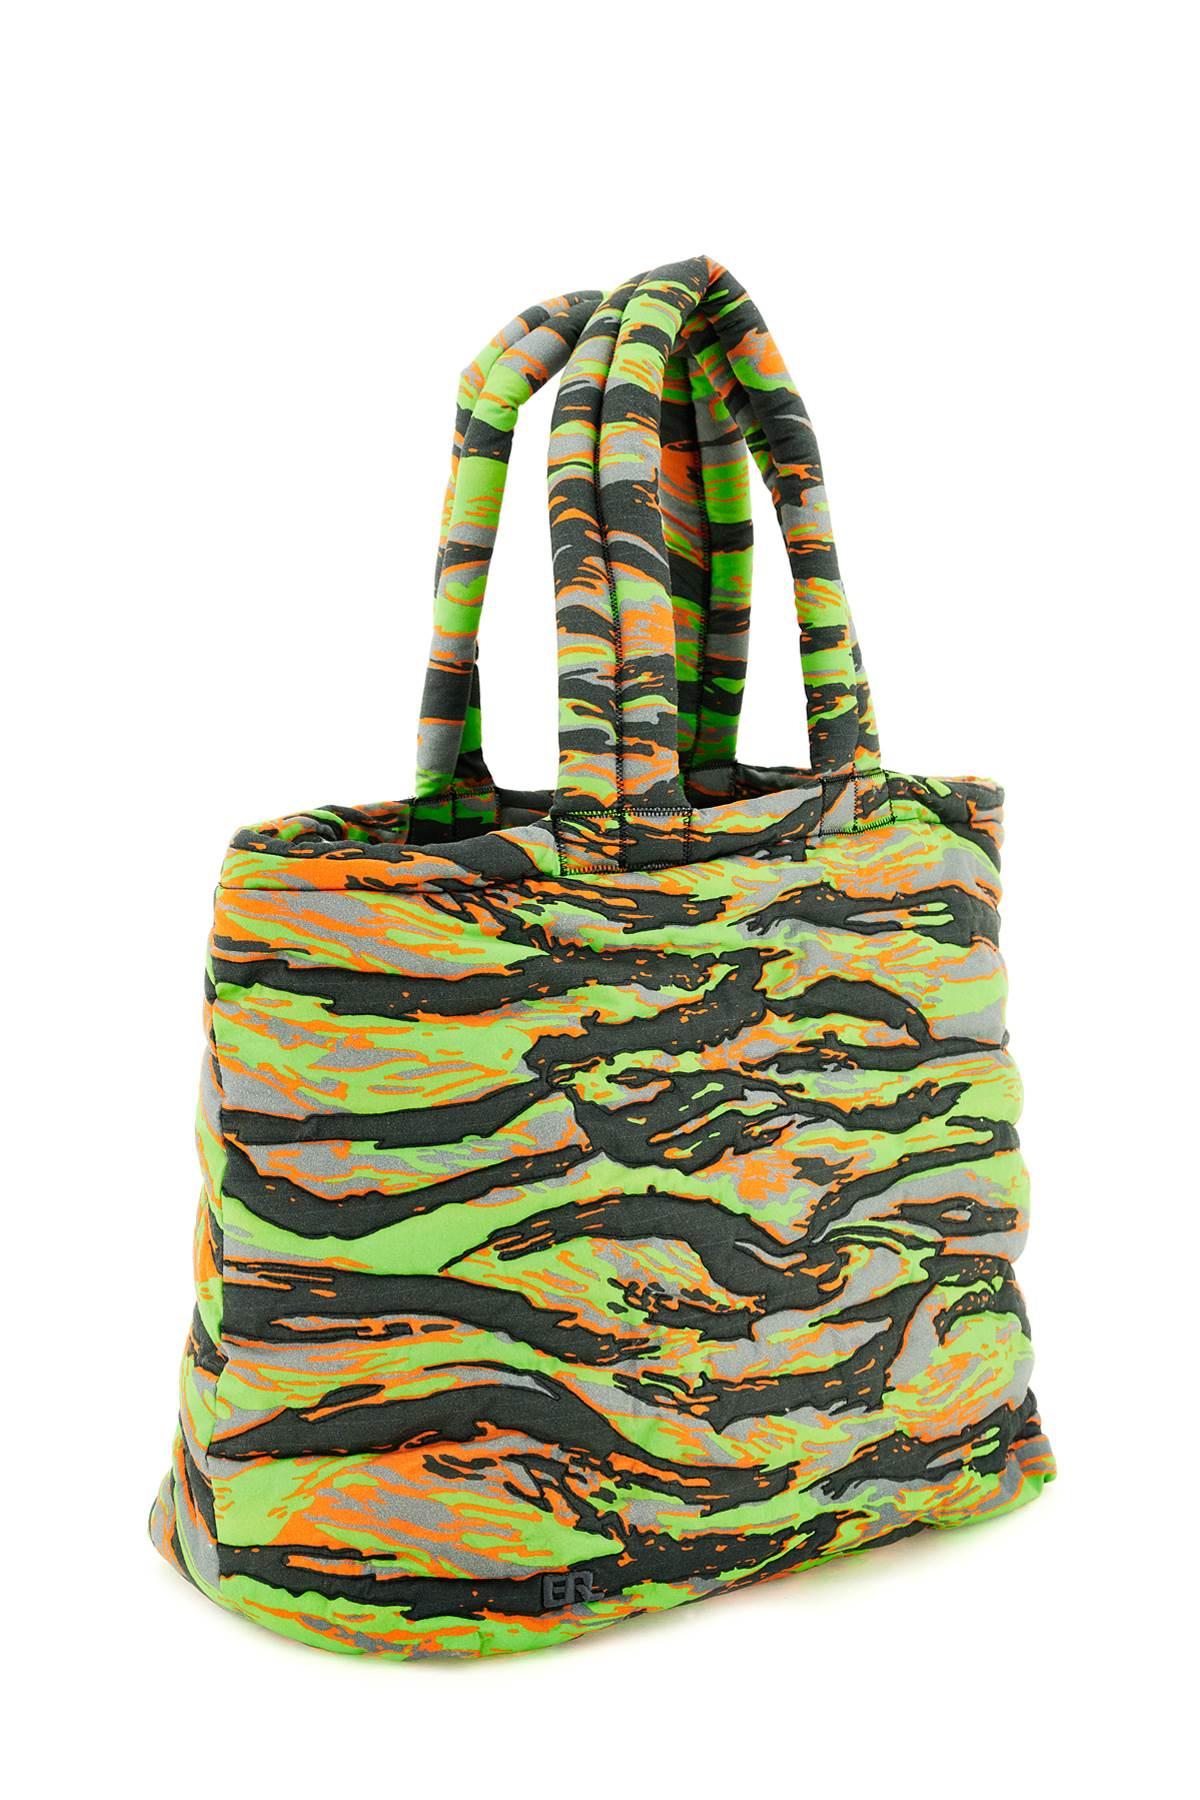 ERL Camouflage Puffer Bag - Os